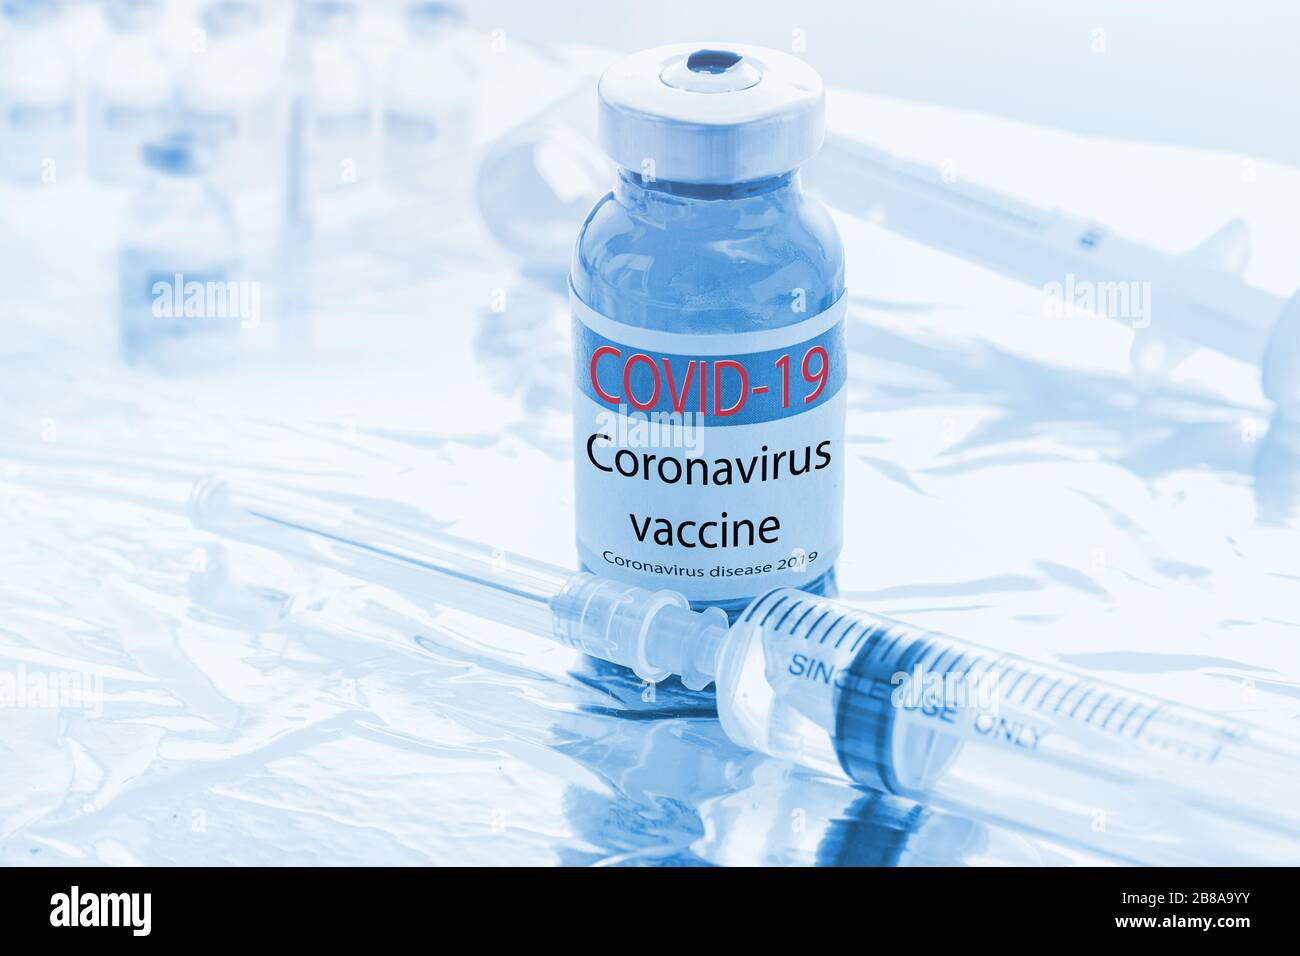 Coronavirus Vaccine,Vaccine and syringe injection for prevention, immunization and treatment Stop Pandemic from COVID-19 infectious,novel coronavirus Stock Photo